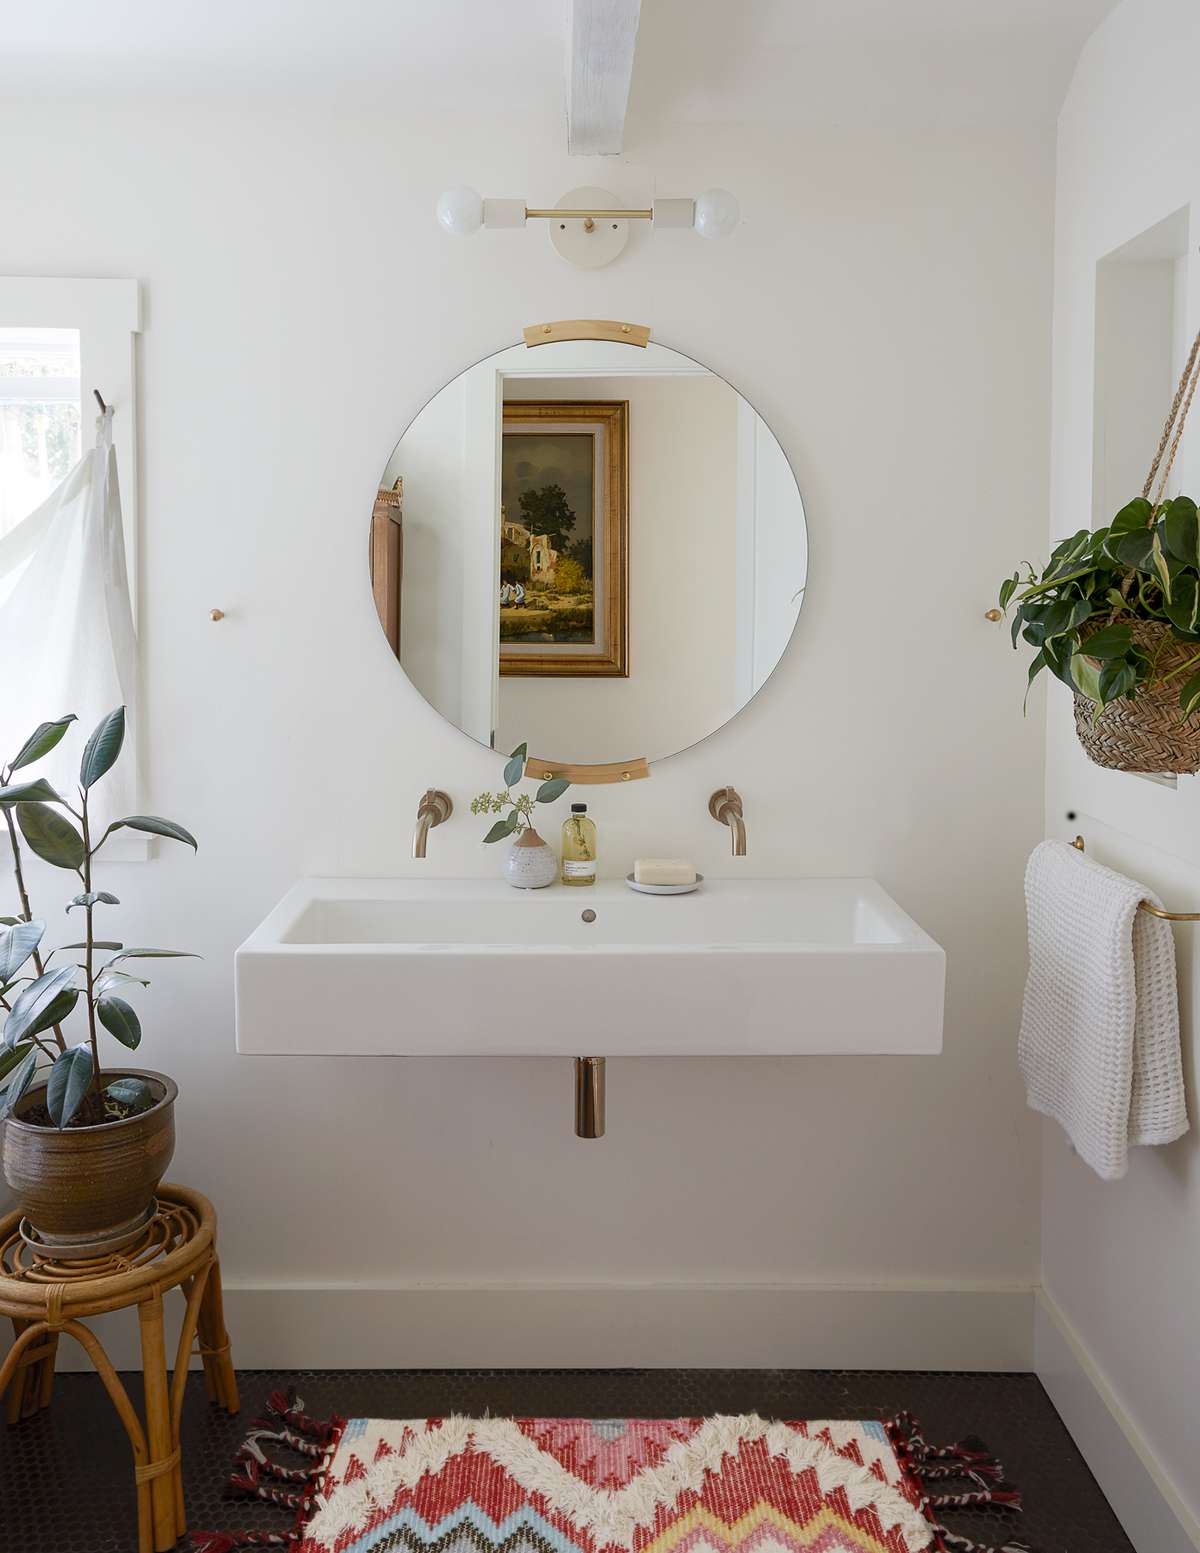 6 Bathroom Paint Colors We Re Loving In, How To Paint A Bathtub White